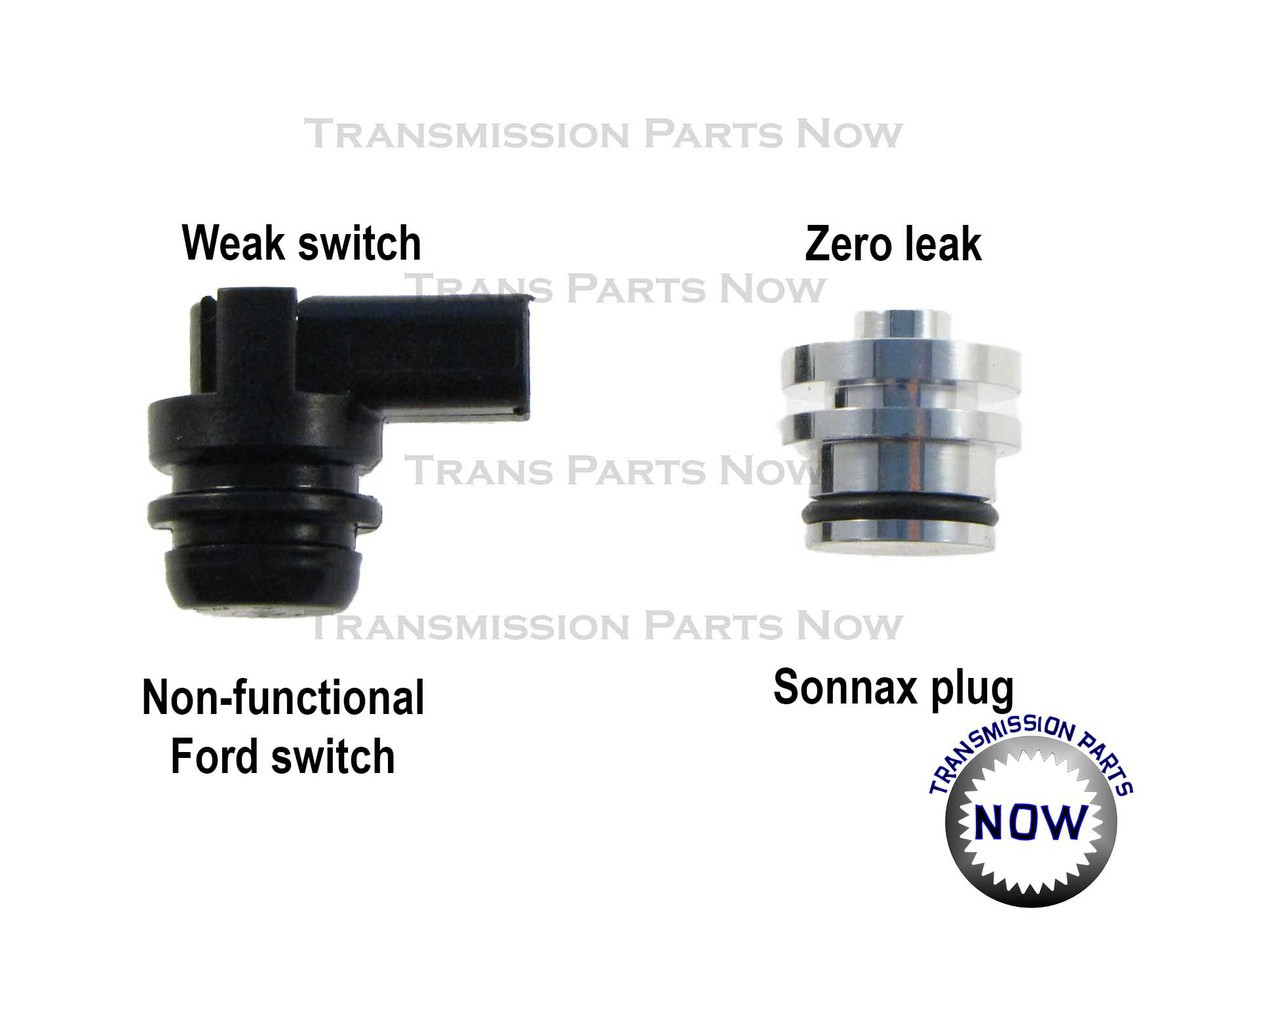 Remanufactured 5R110W Transmissions